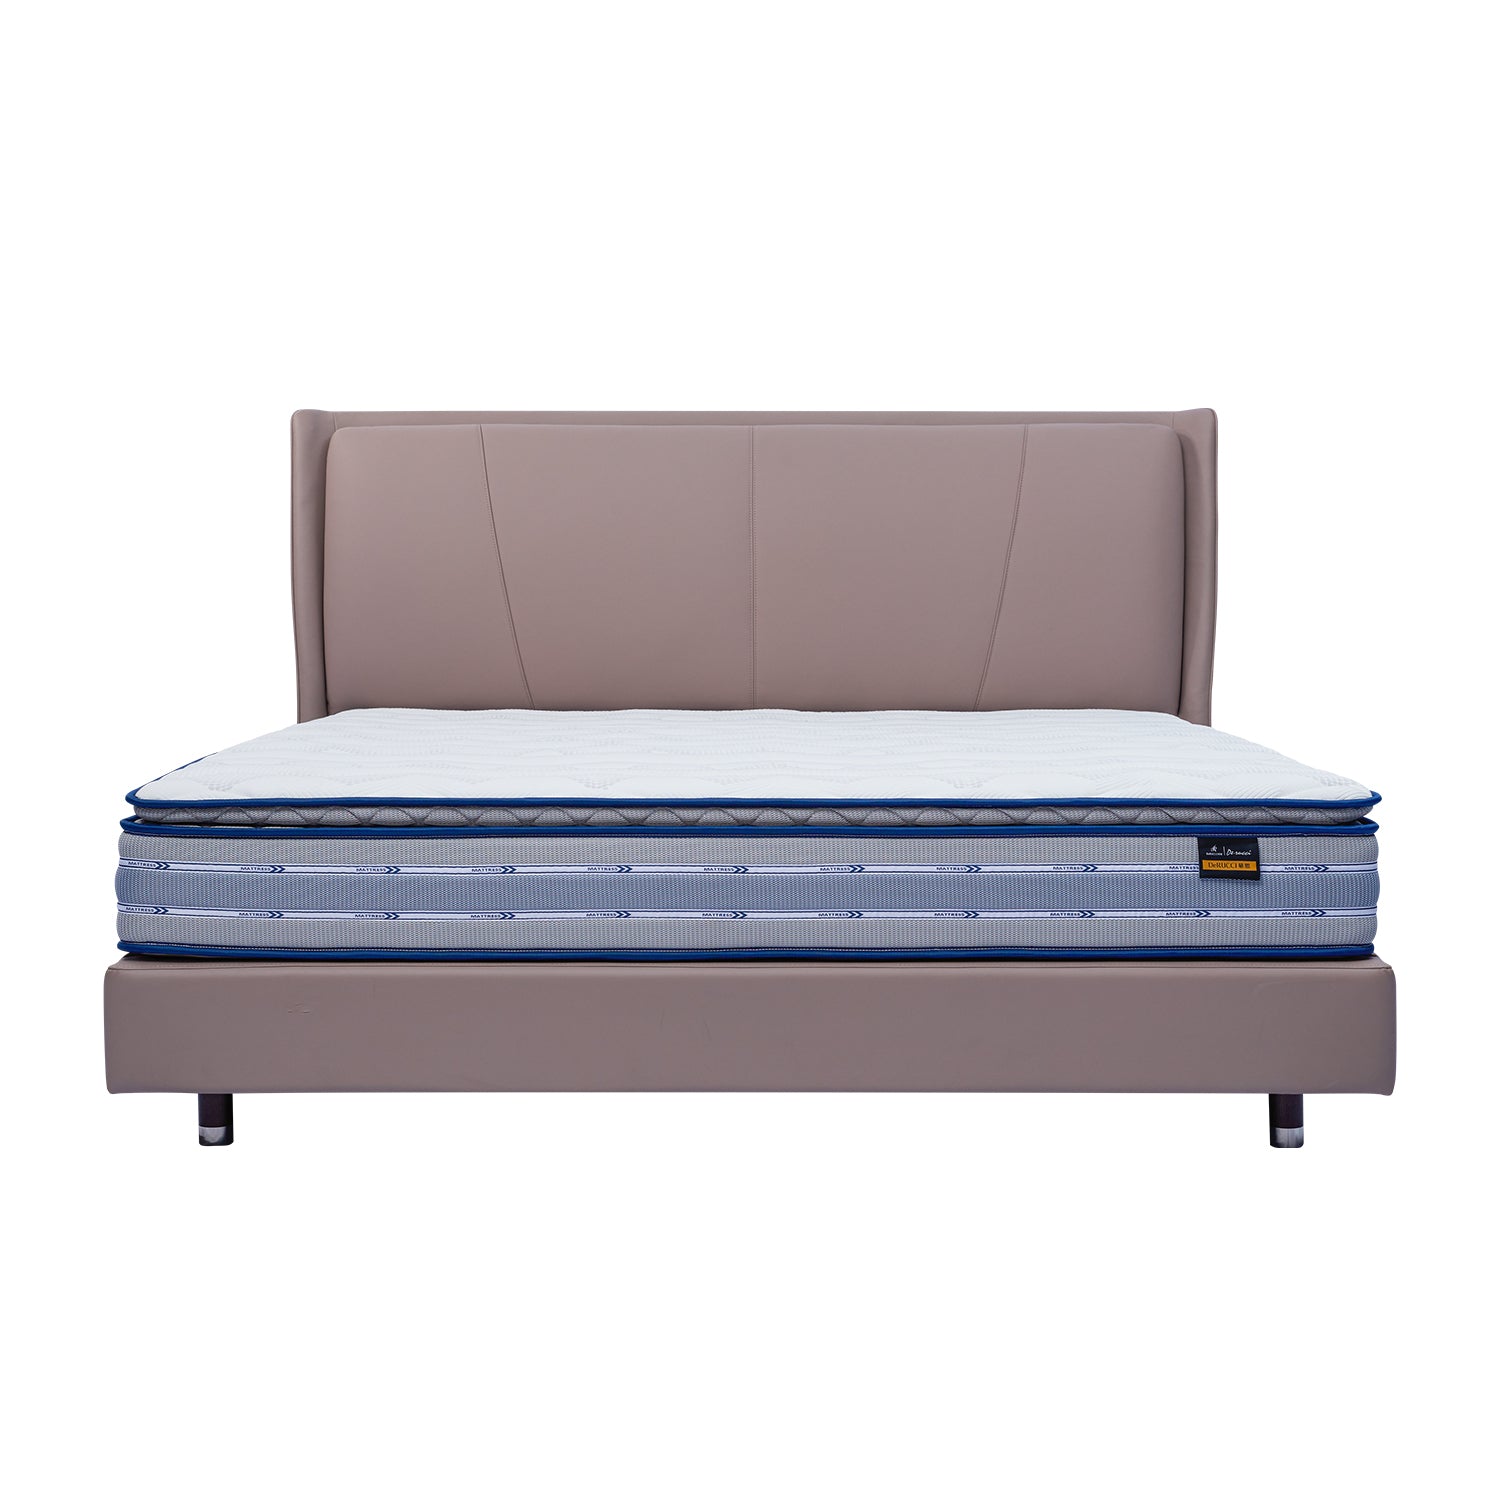 DeRUCCI beige leather bed frame with padded headboard and blue-white mattress